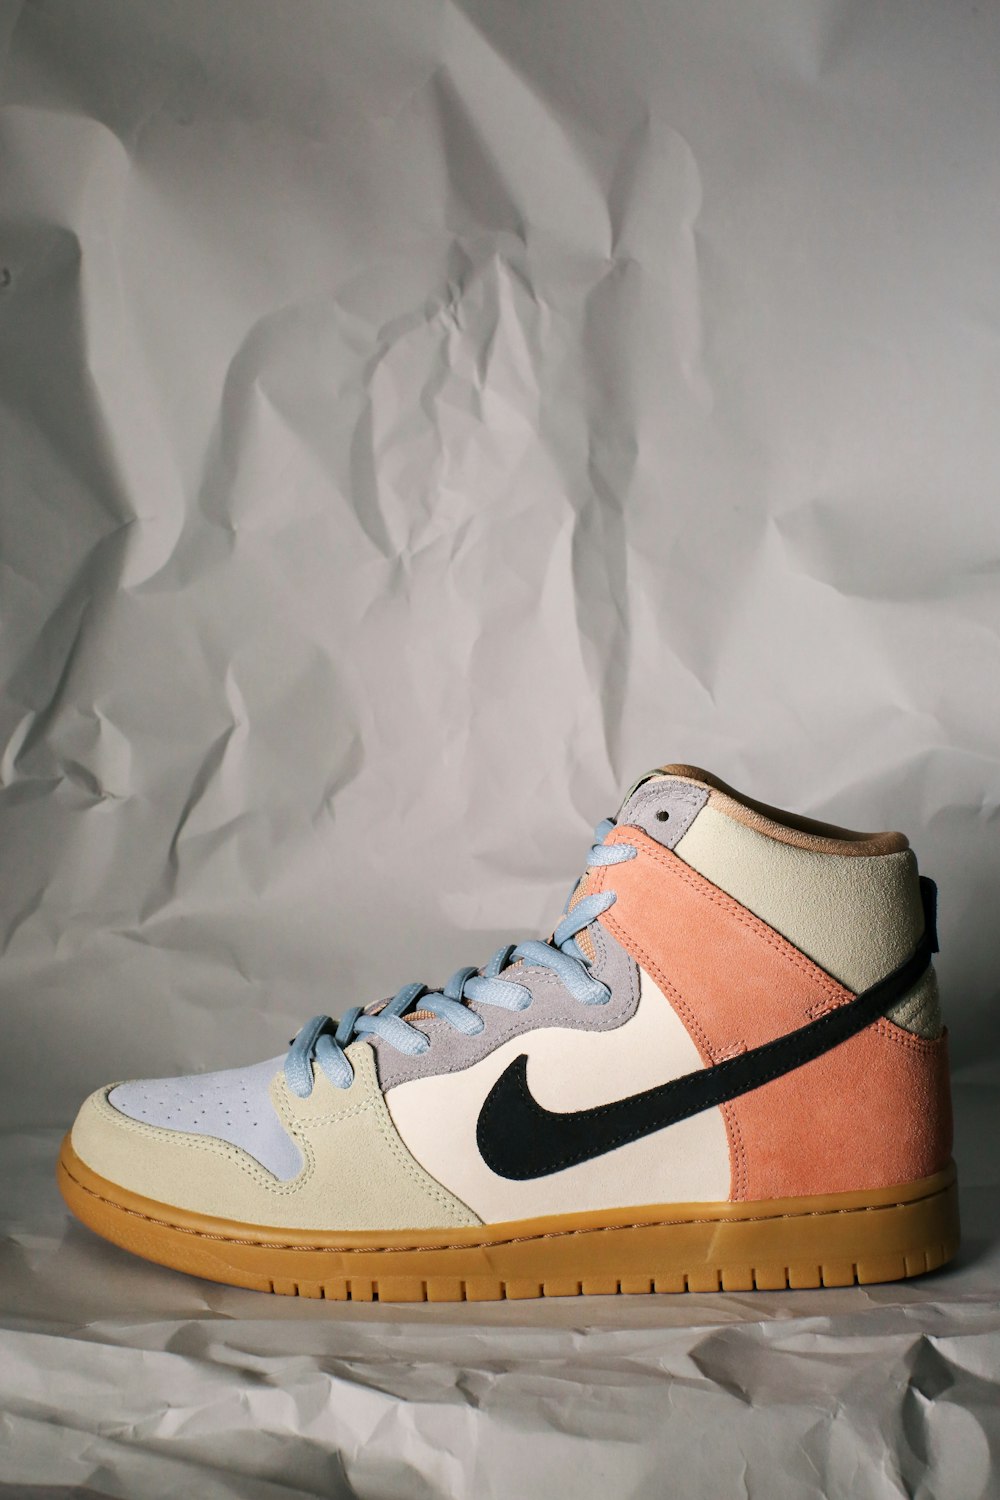 white and brown nike sneaker